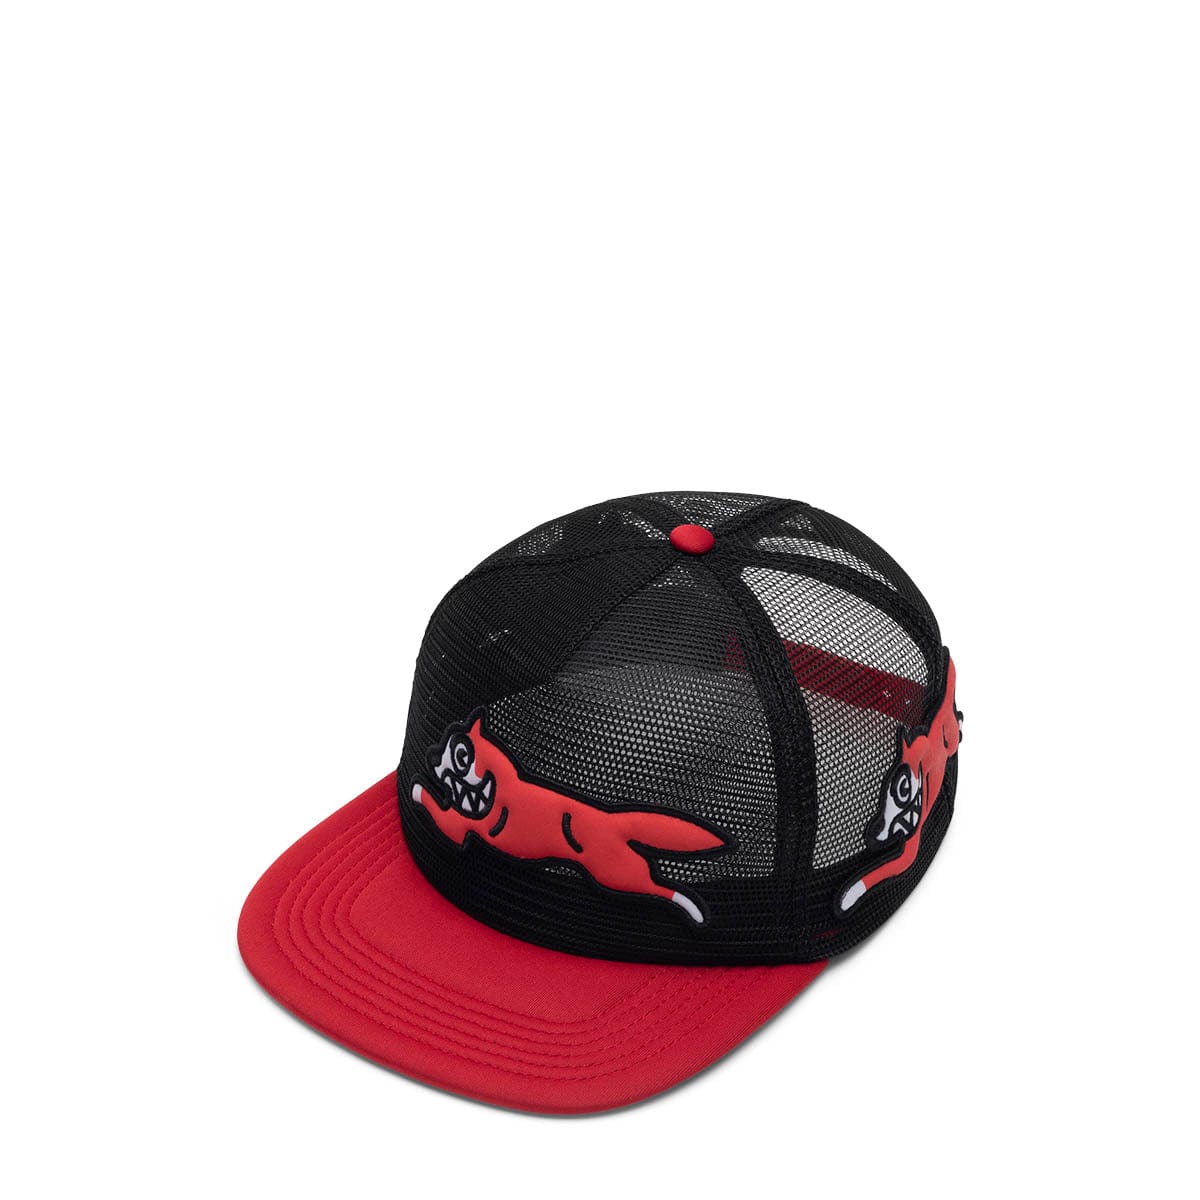 ICECREAM Accessories - HATS - Snapback-Fitted Hat ROCOCCO RED / O/S MESH TRUCKER HAT